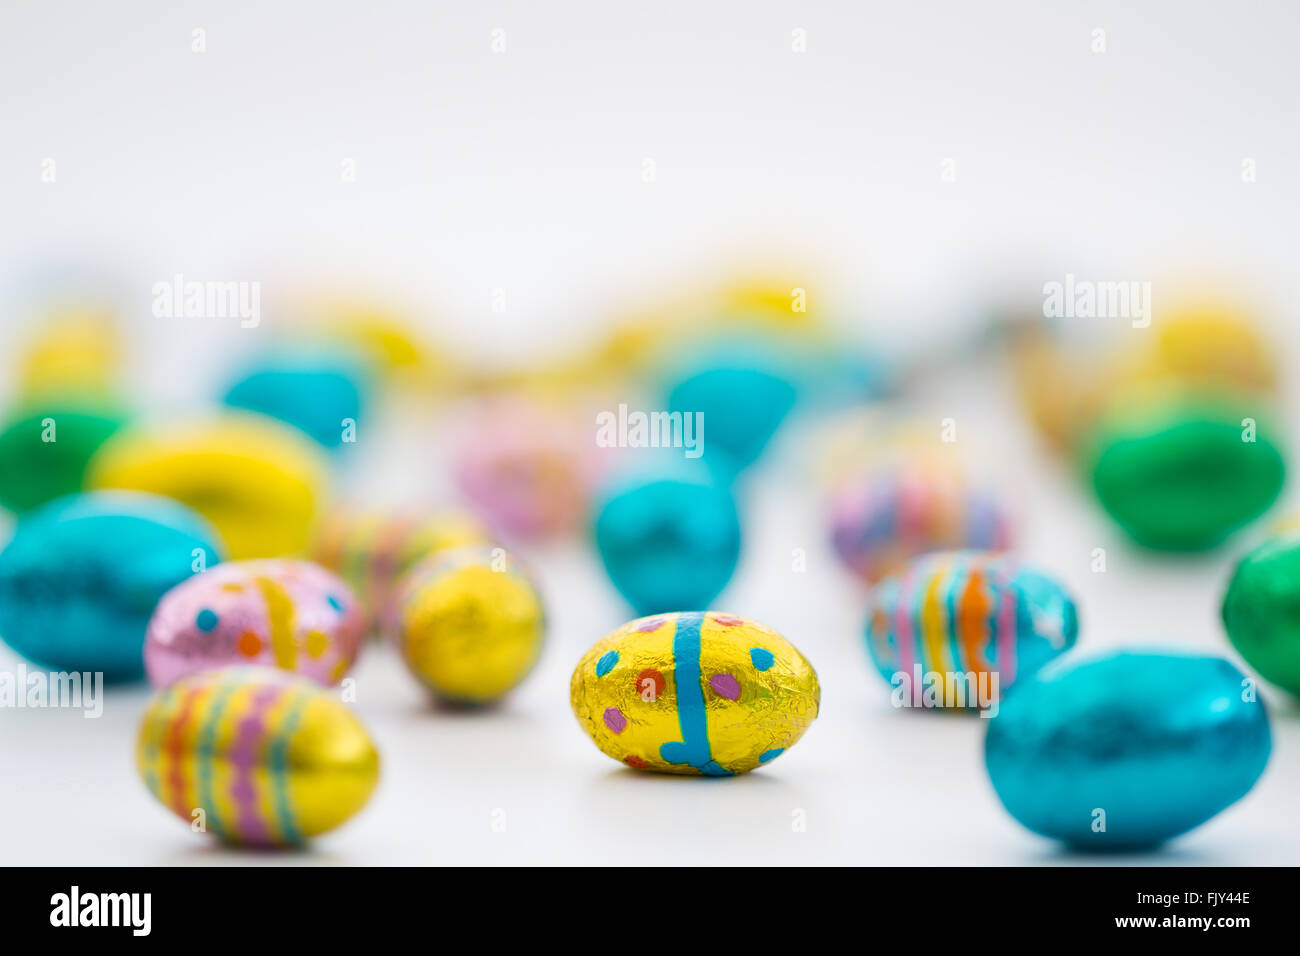 lots of small, colorful Easter eggs scattered over a white background. Stock Photo